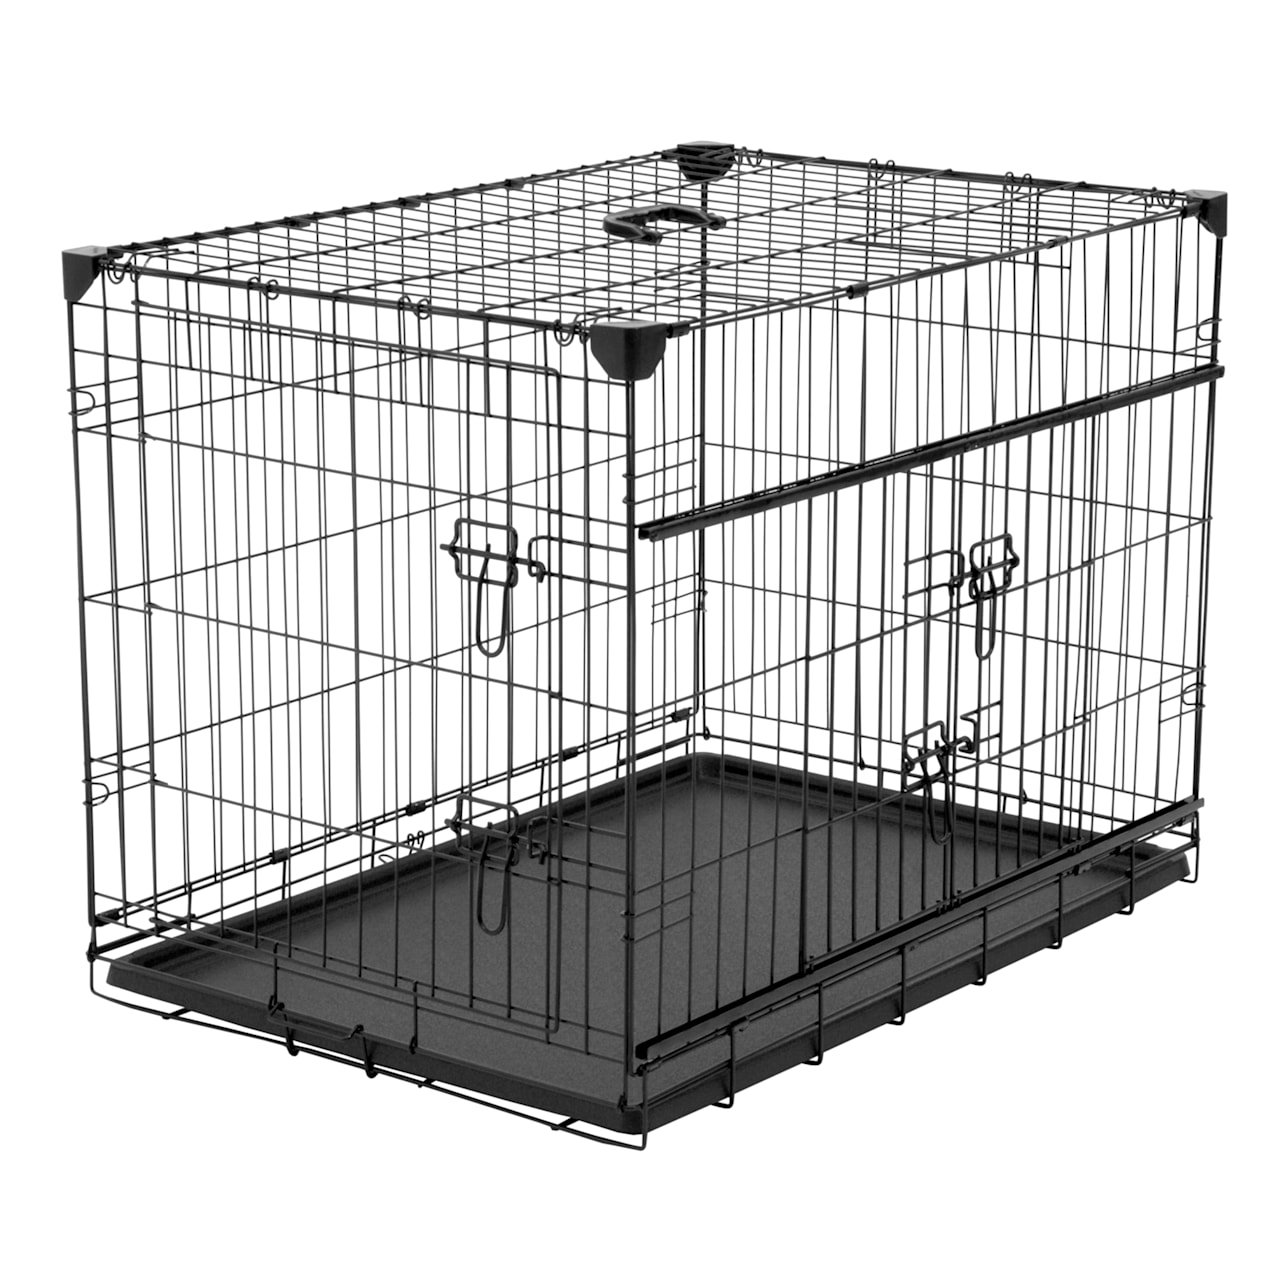 Lucky Dog Double Door Dog Crate, 30" L X 21" W X 24" H Petco